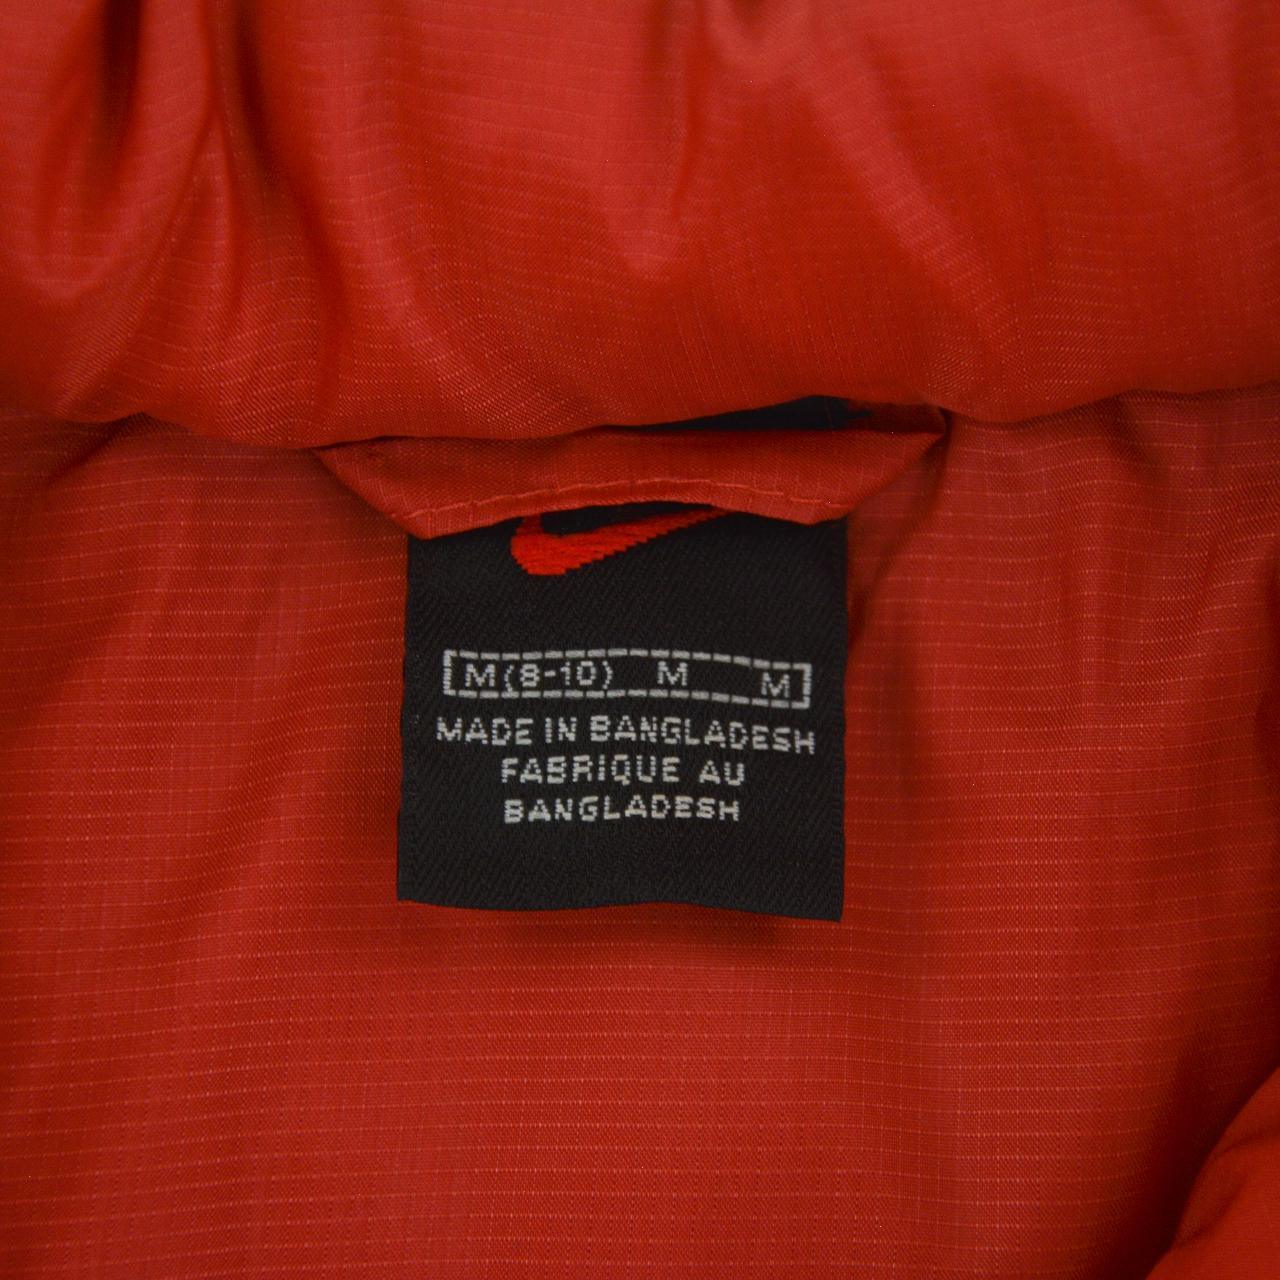 Vintage Nike Puffer Jacket Size M - Known Source